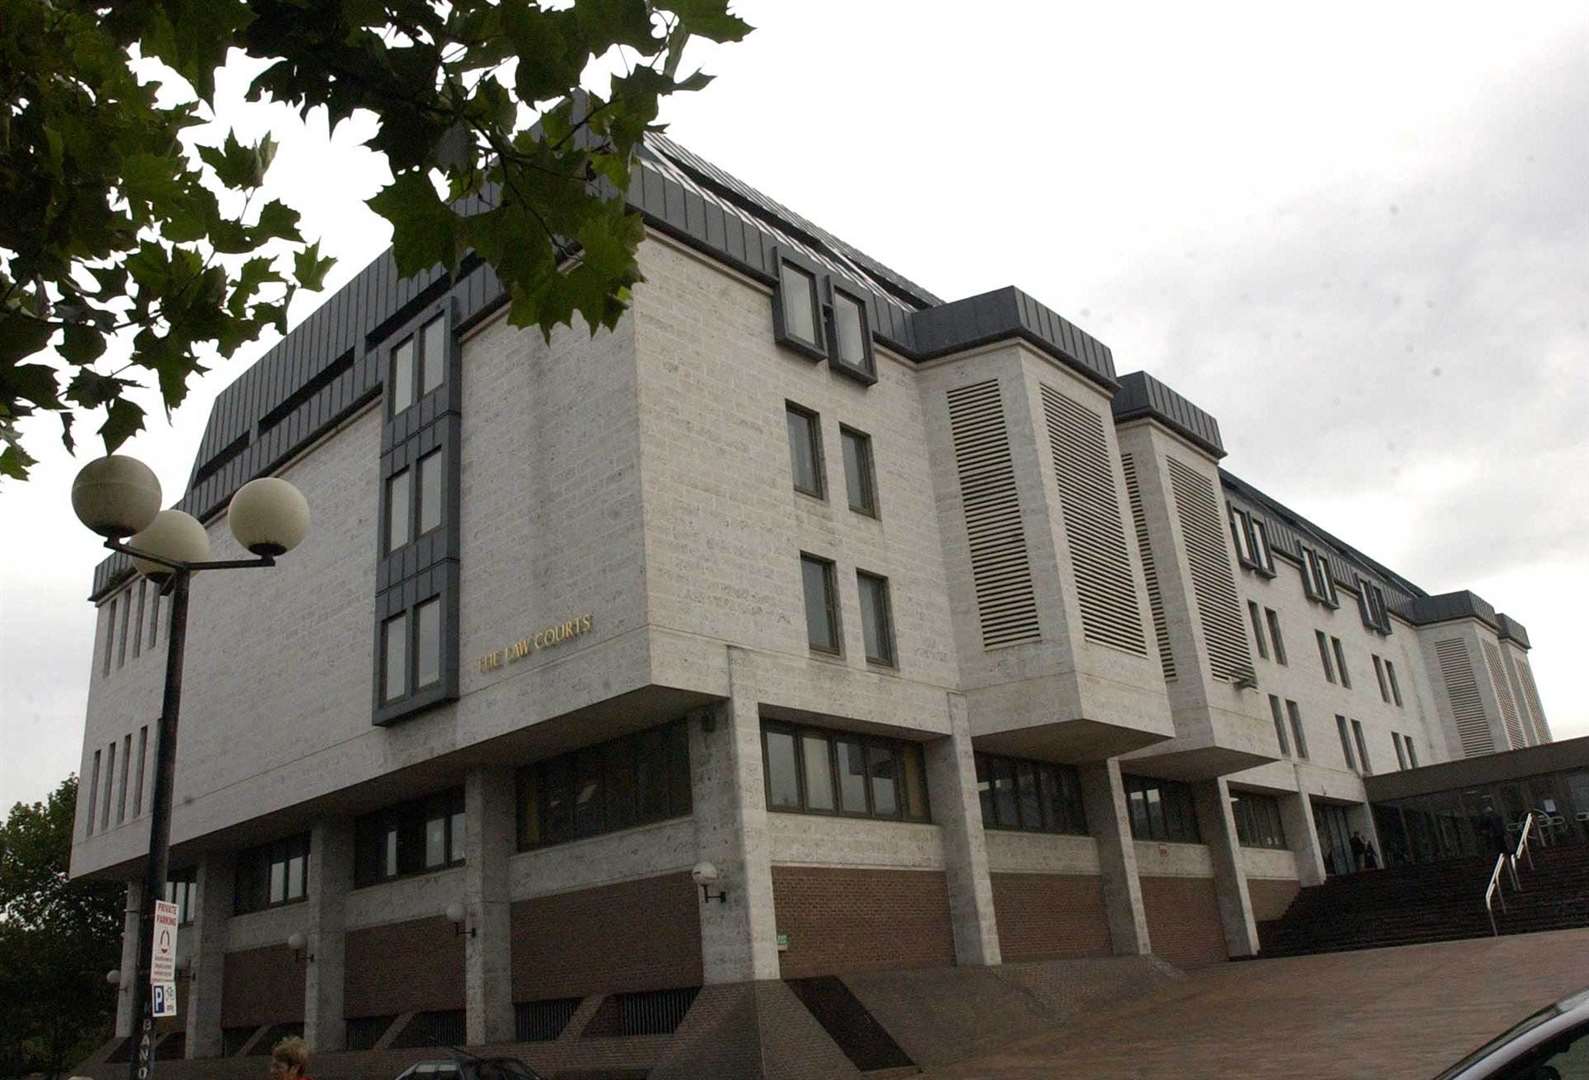 A 20 minute hearing took place at Maidstone Crown Court